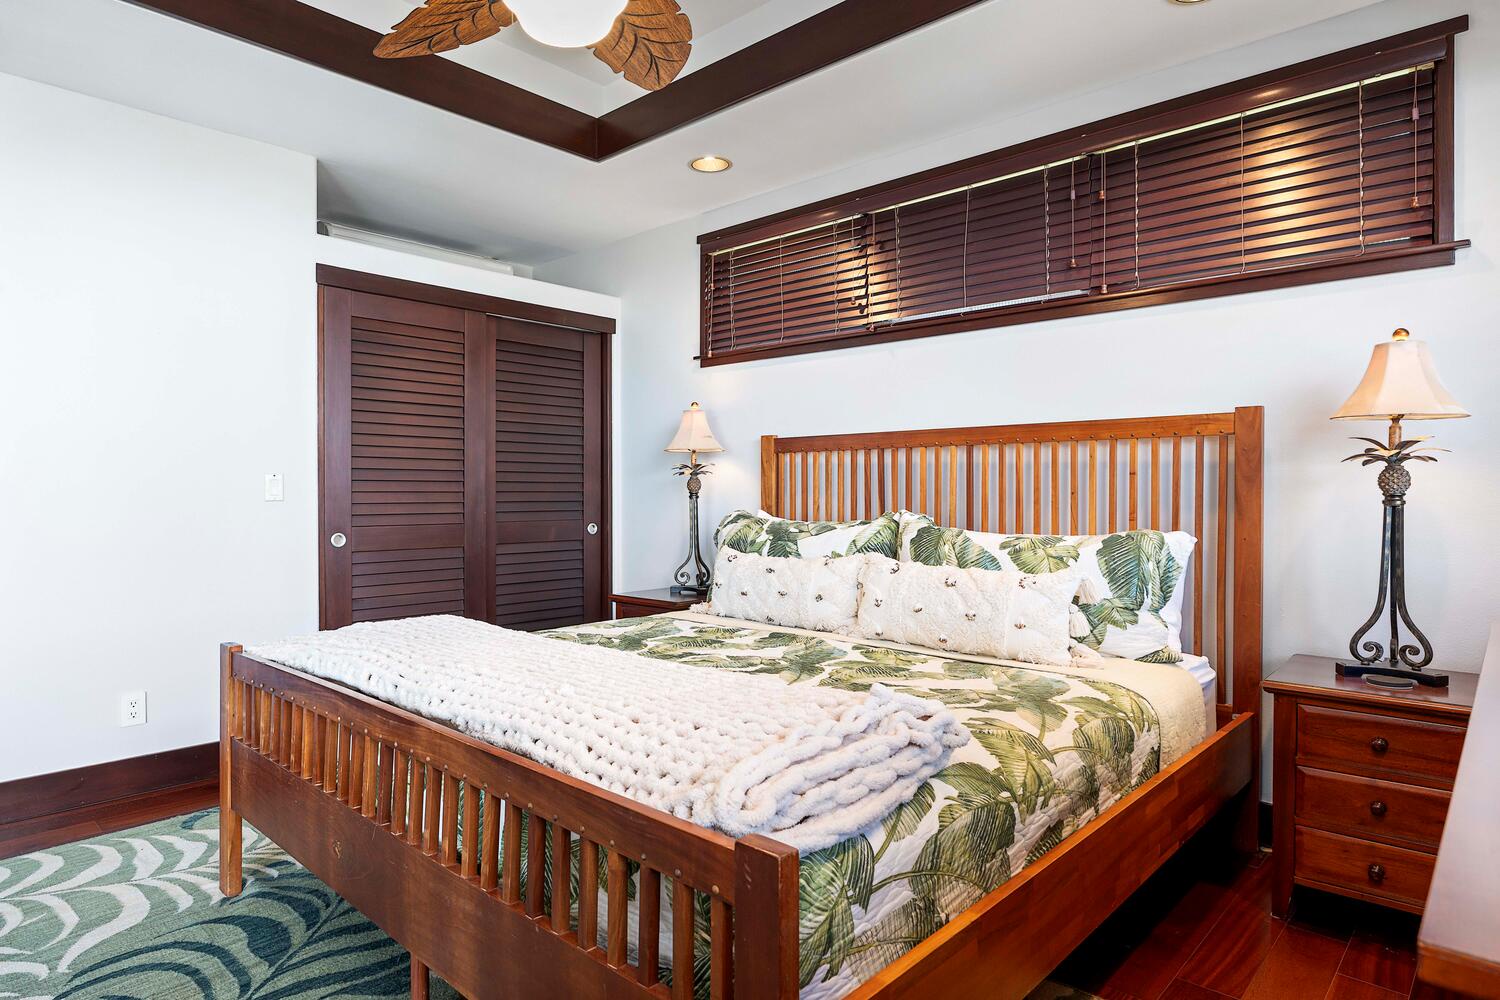 Kailua Kona Vacation Rentals, Island Oasis - Equipped with King sized bed, TV, A/C, and Lanai access